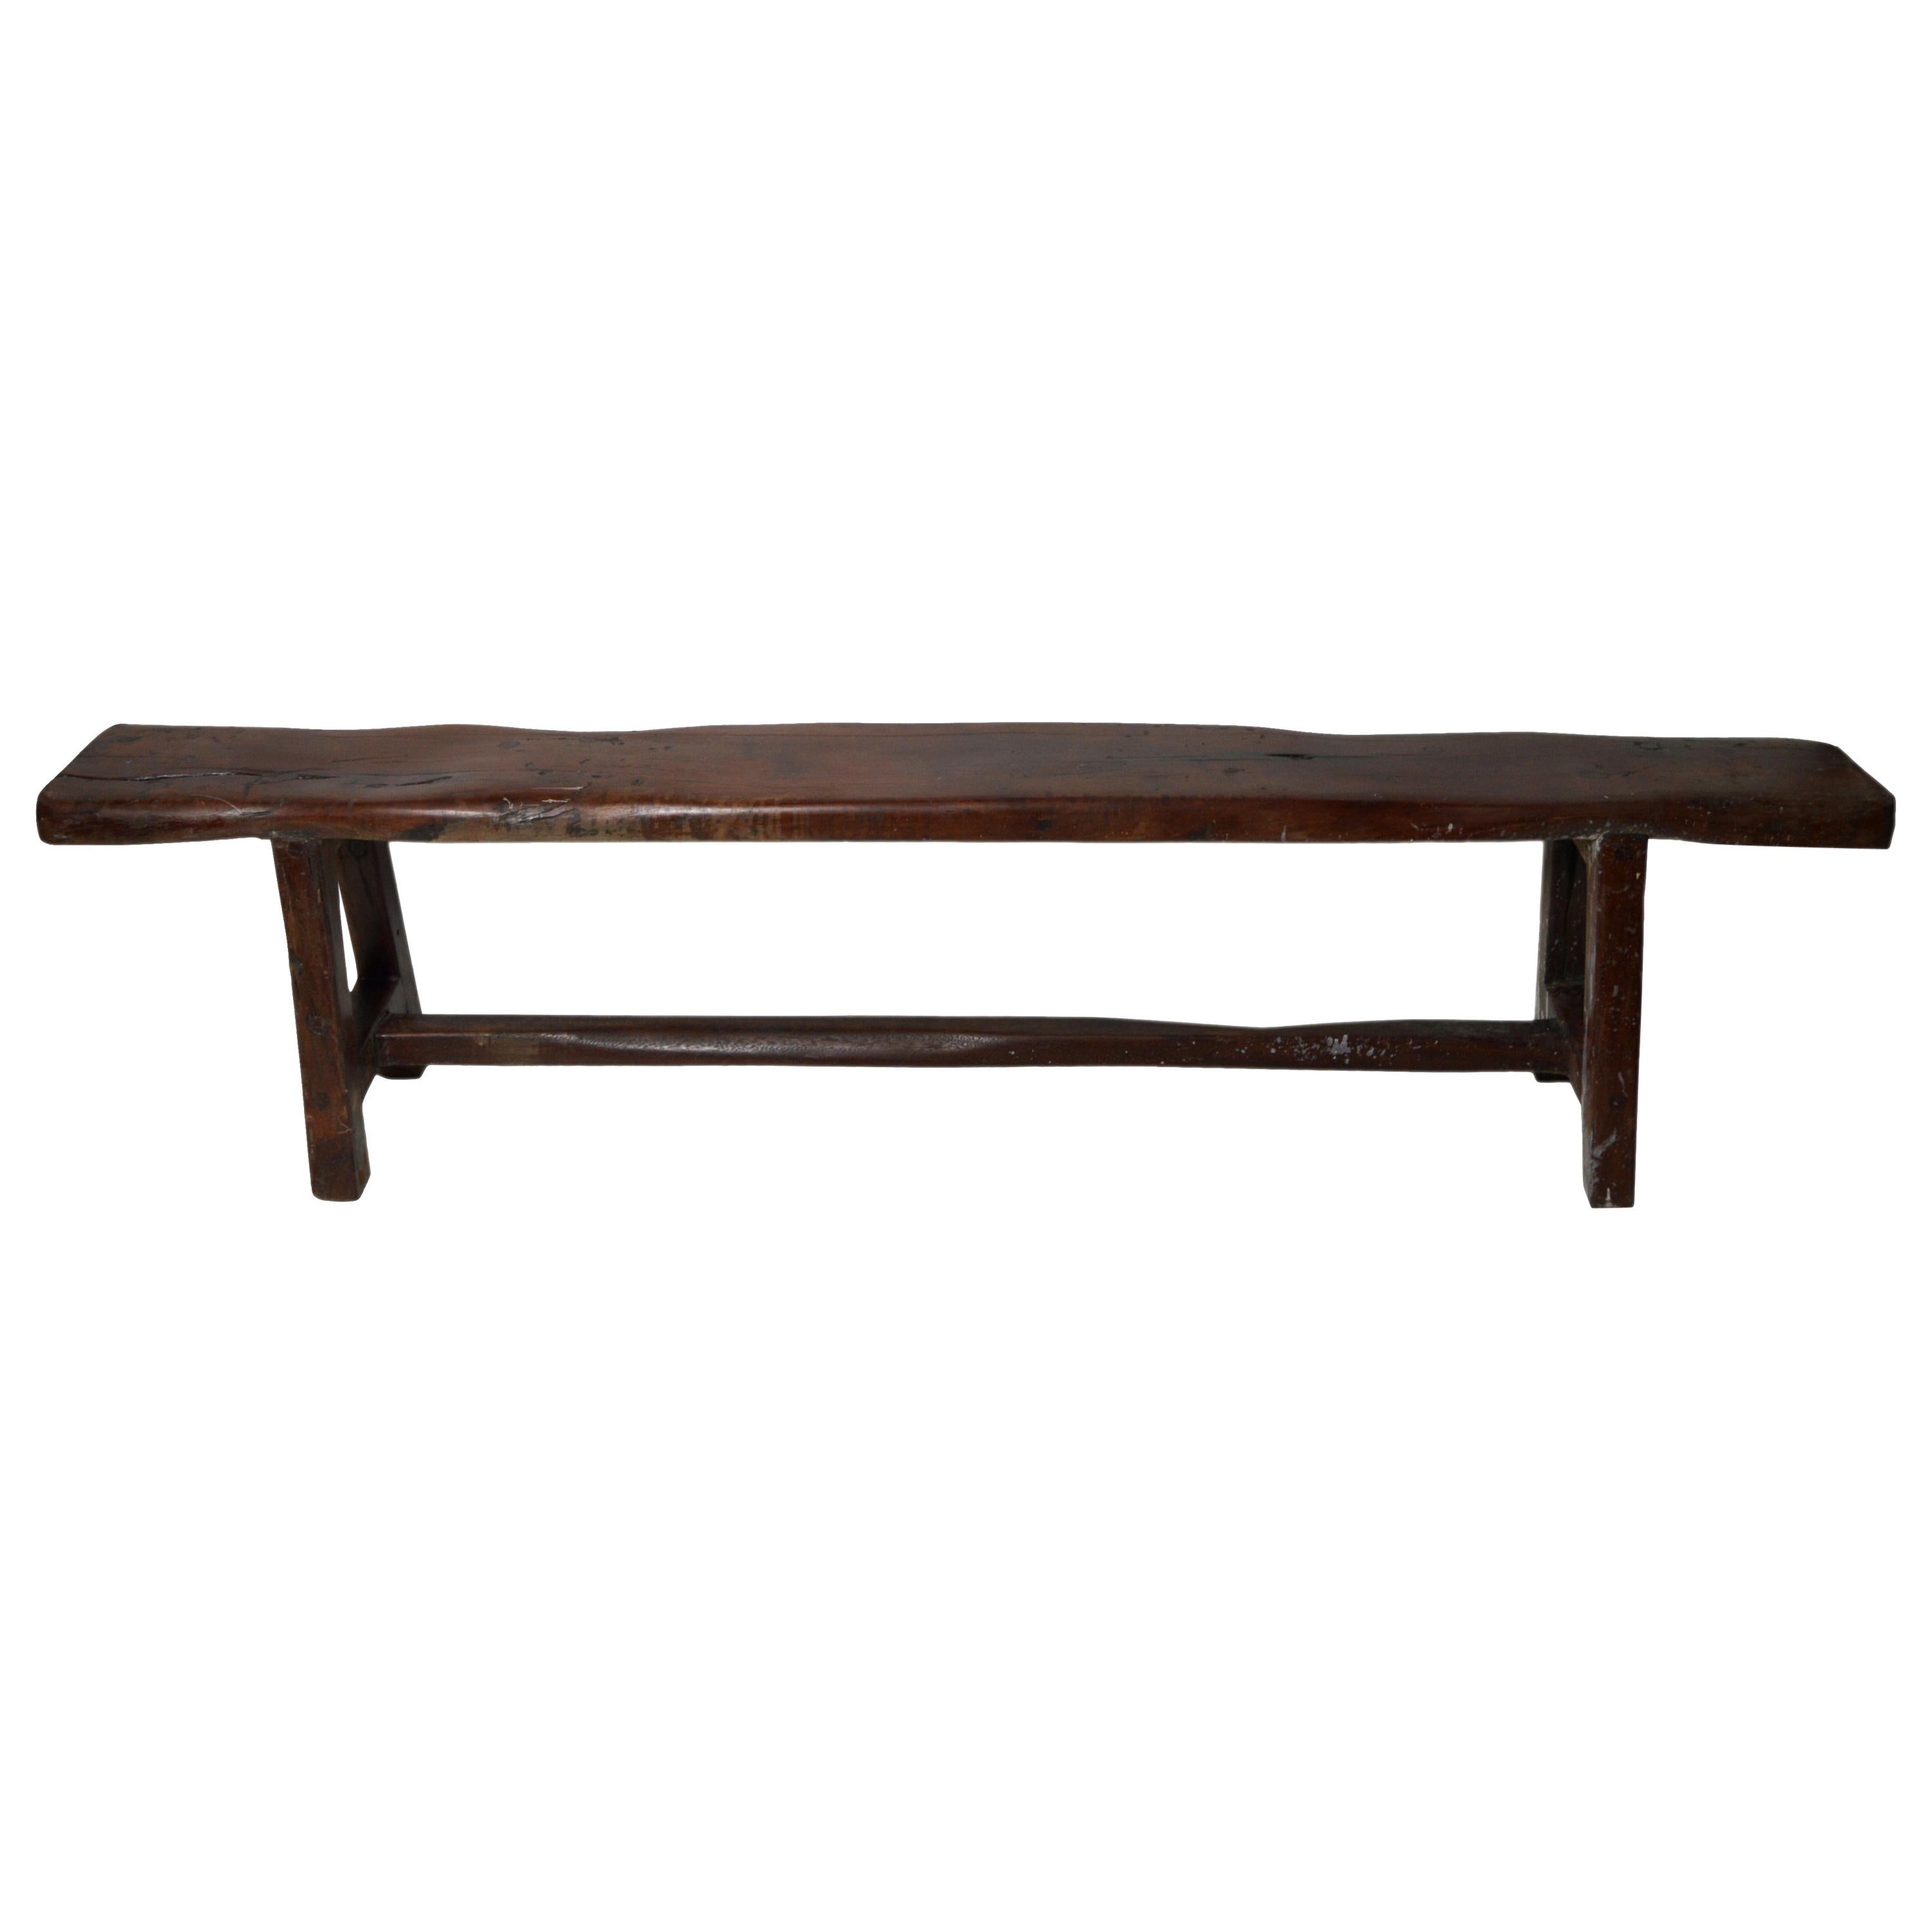 Handmade Vintage Javanese Brown Wood Bench with Splayed Legs and Stretcher